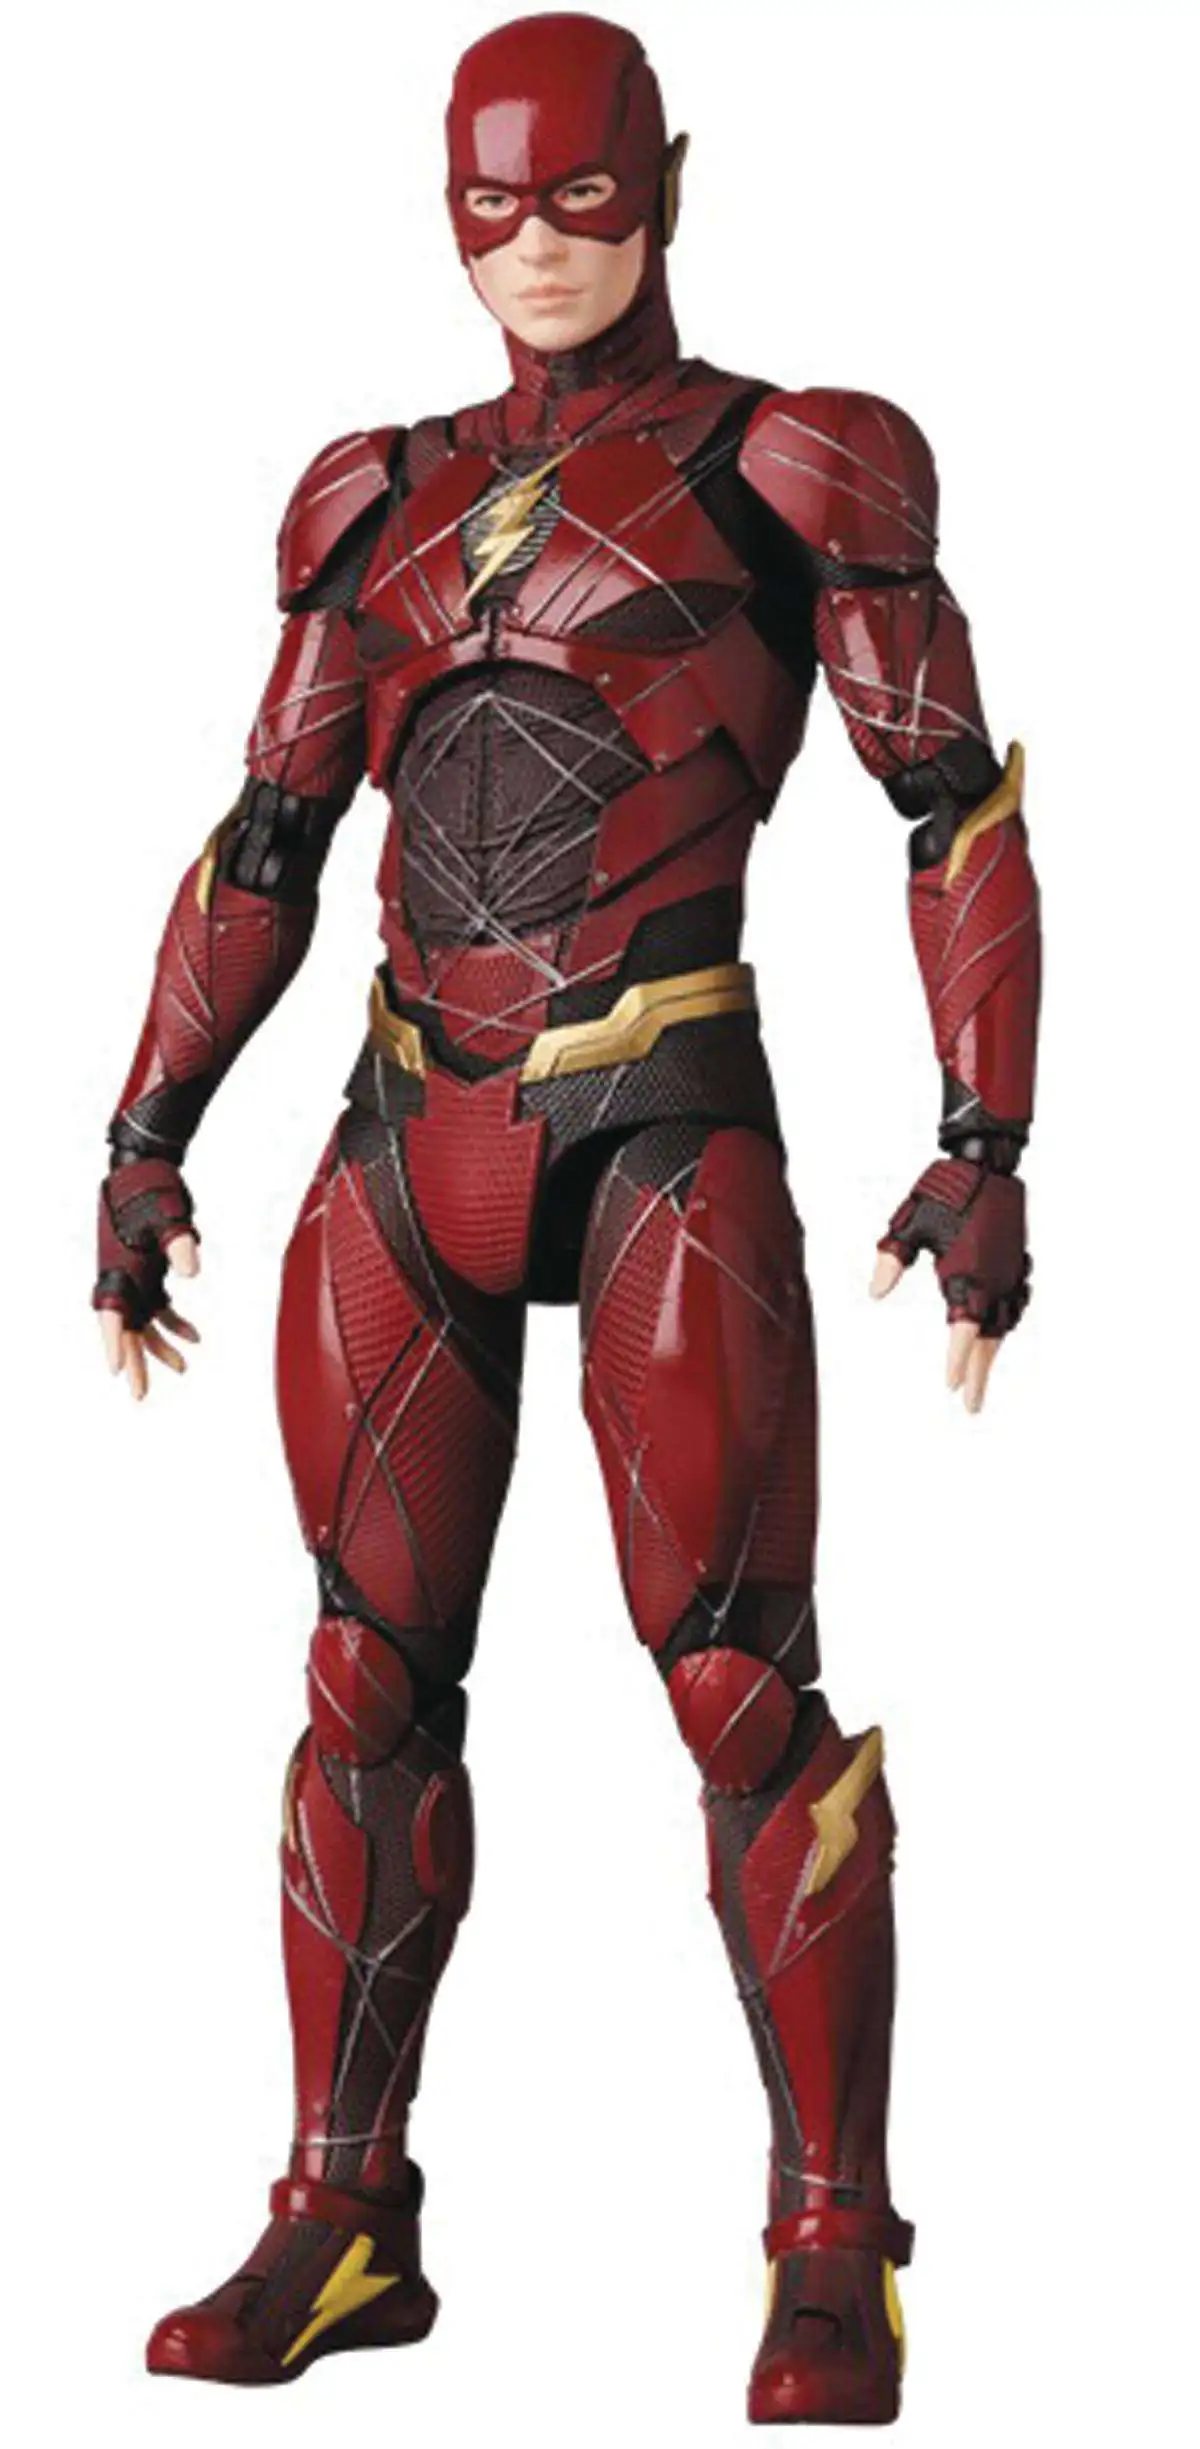 Details about   Mafex 058 DC Comics Justice League The Flash PVC Action Figure Toy Box Packed 